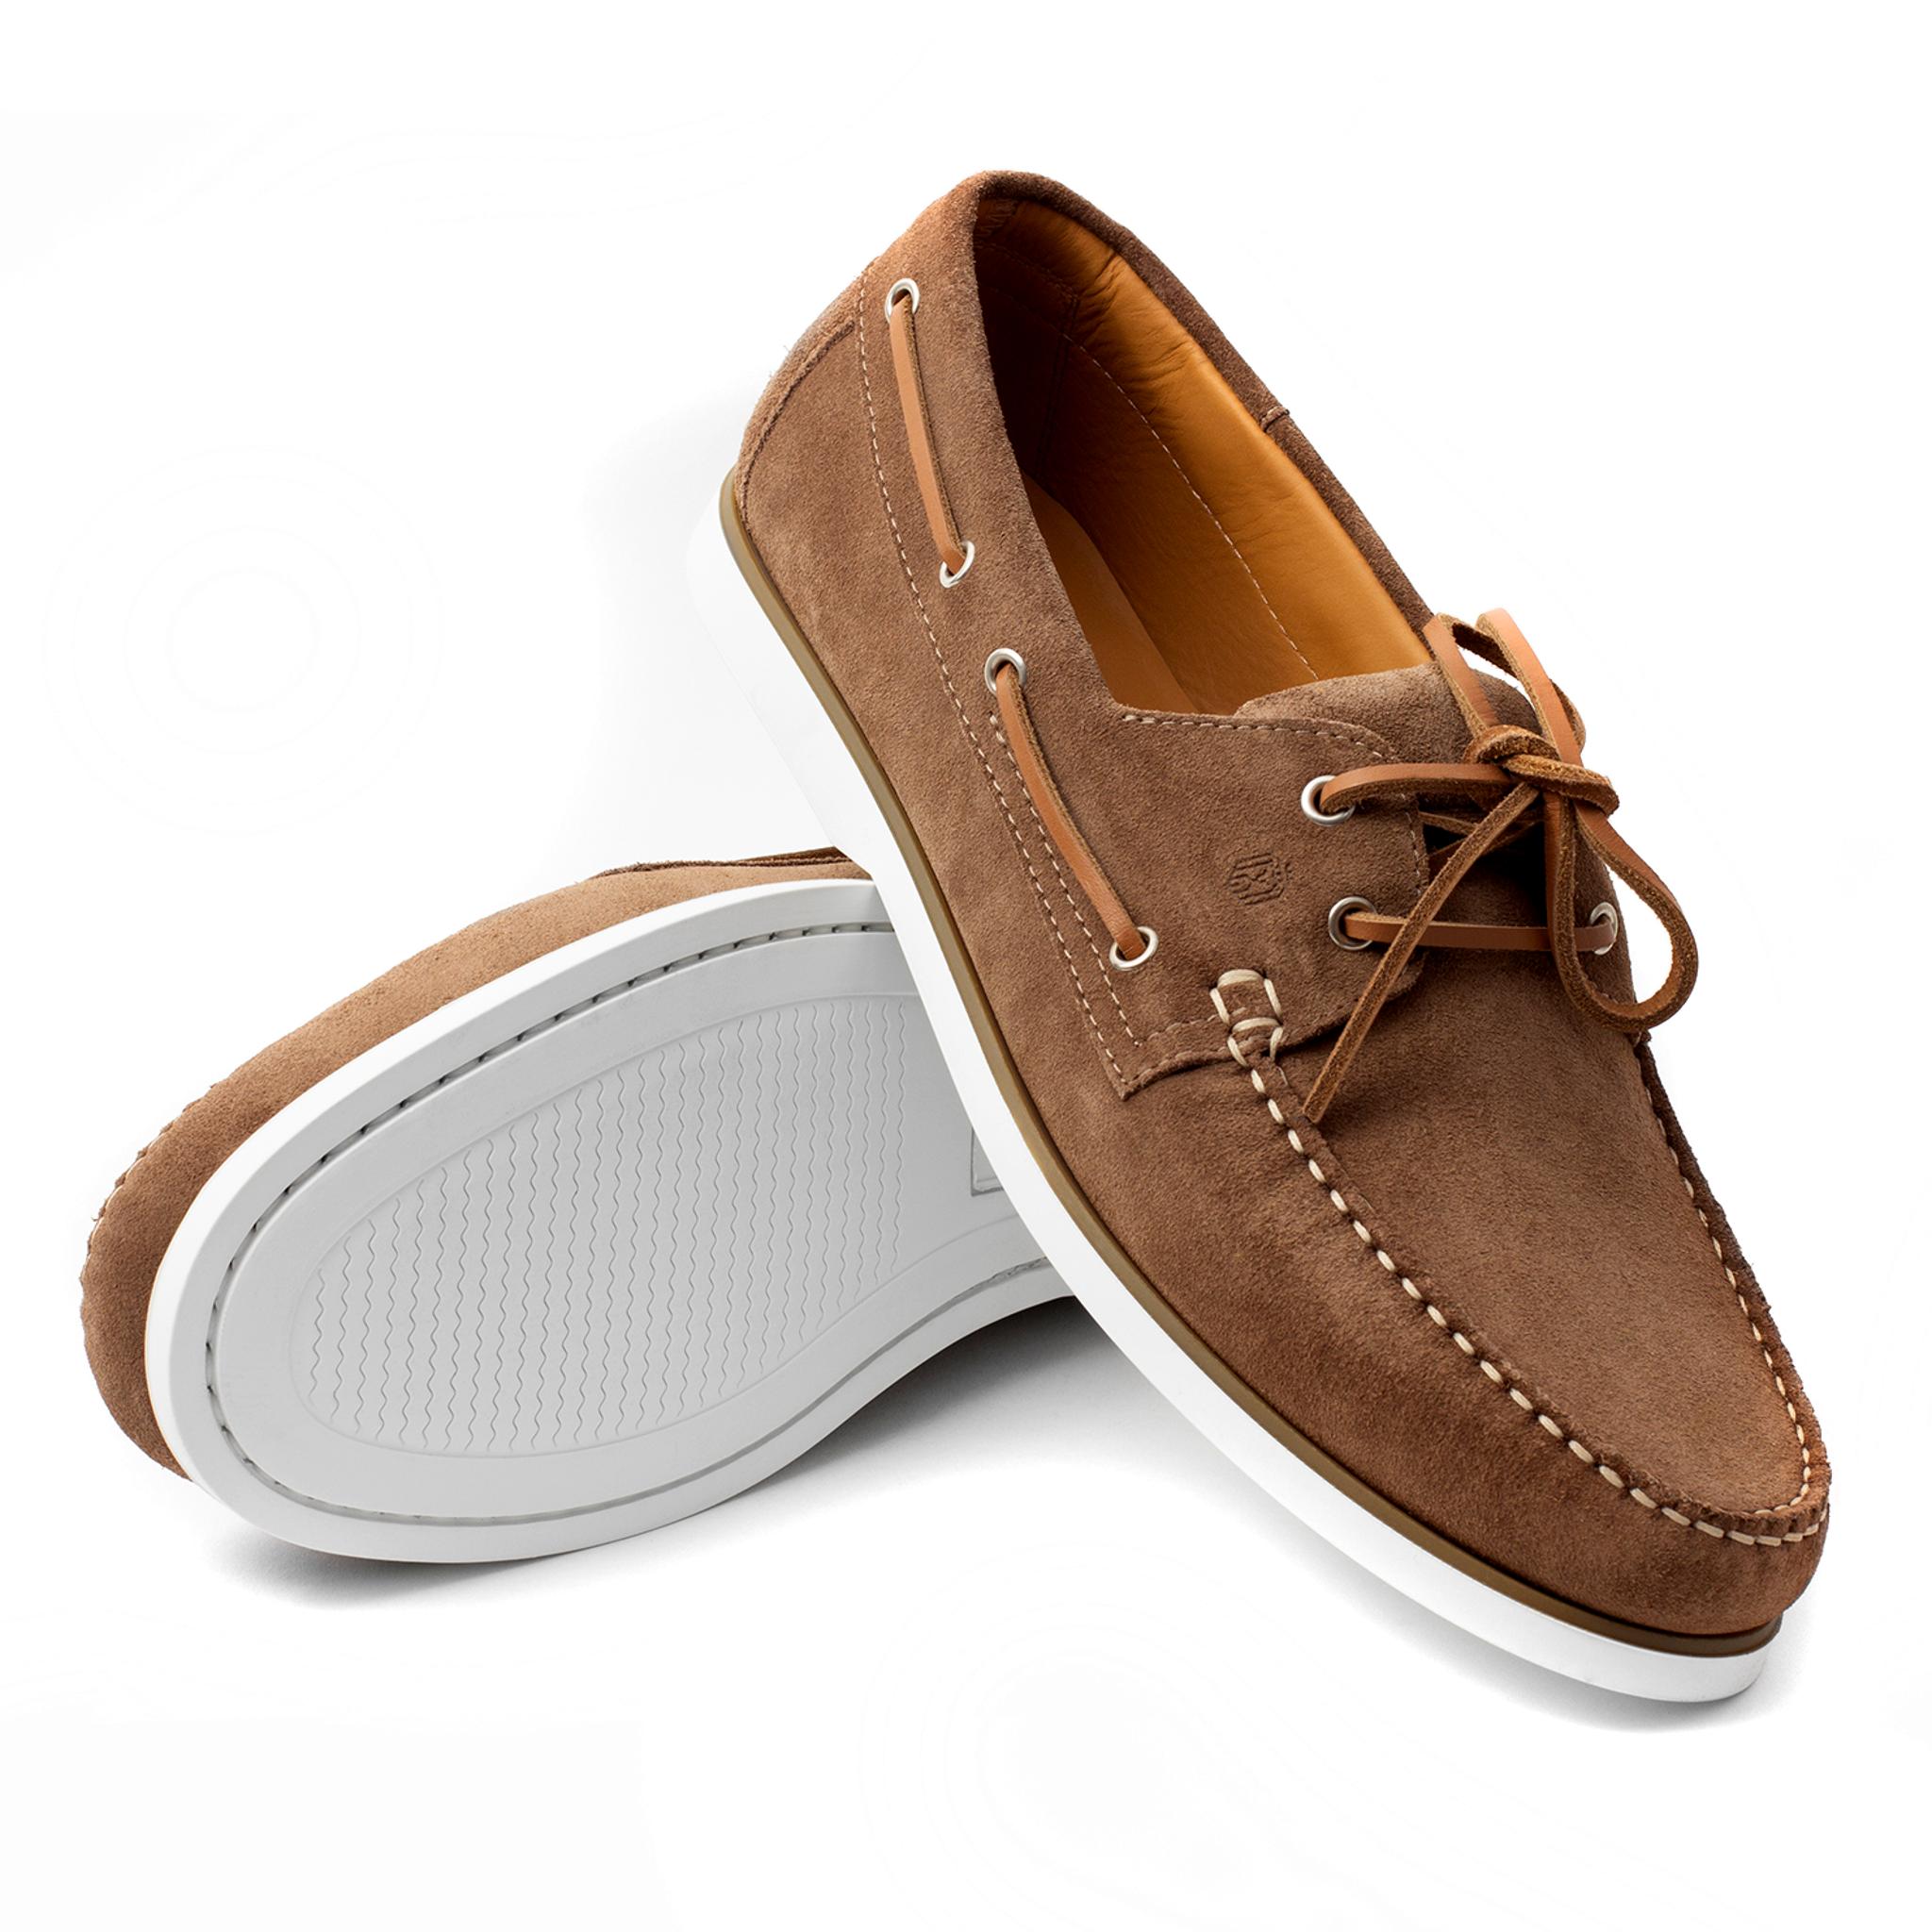 yacht shoes suede